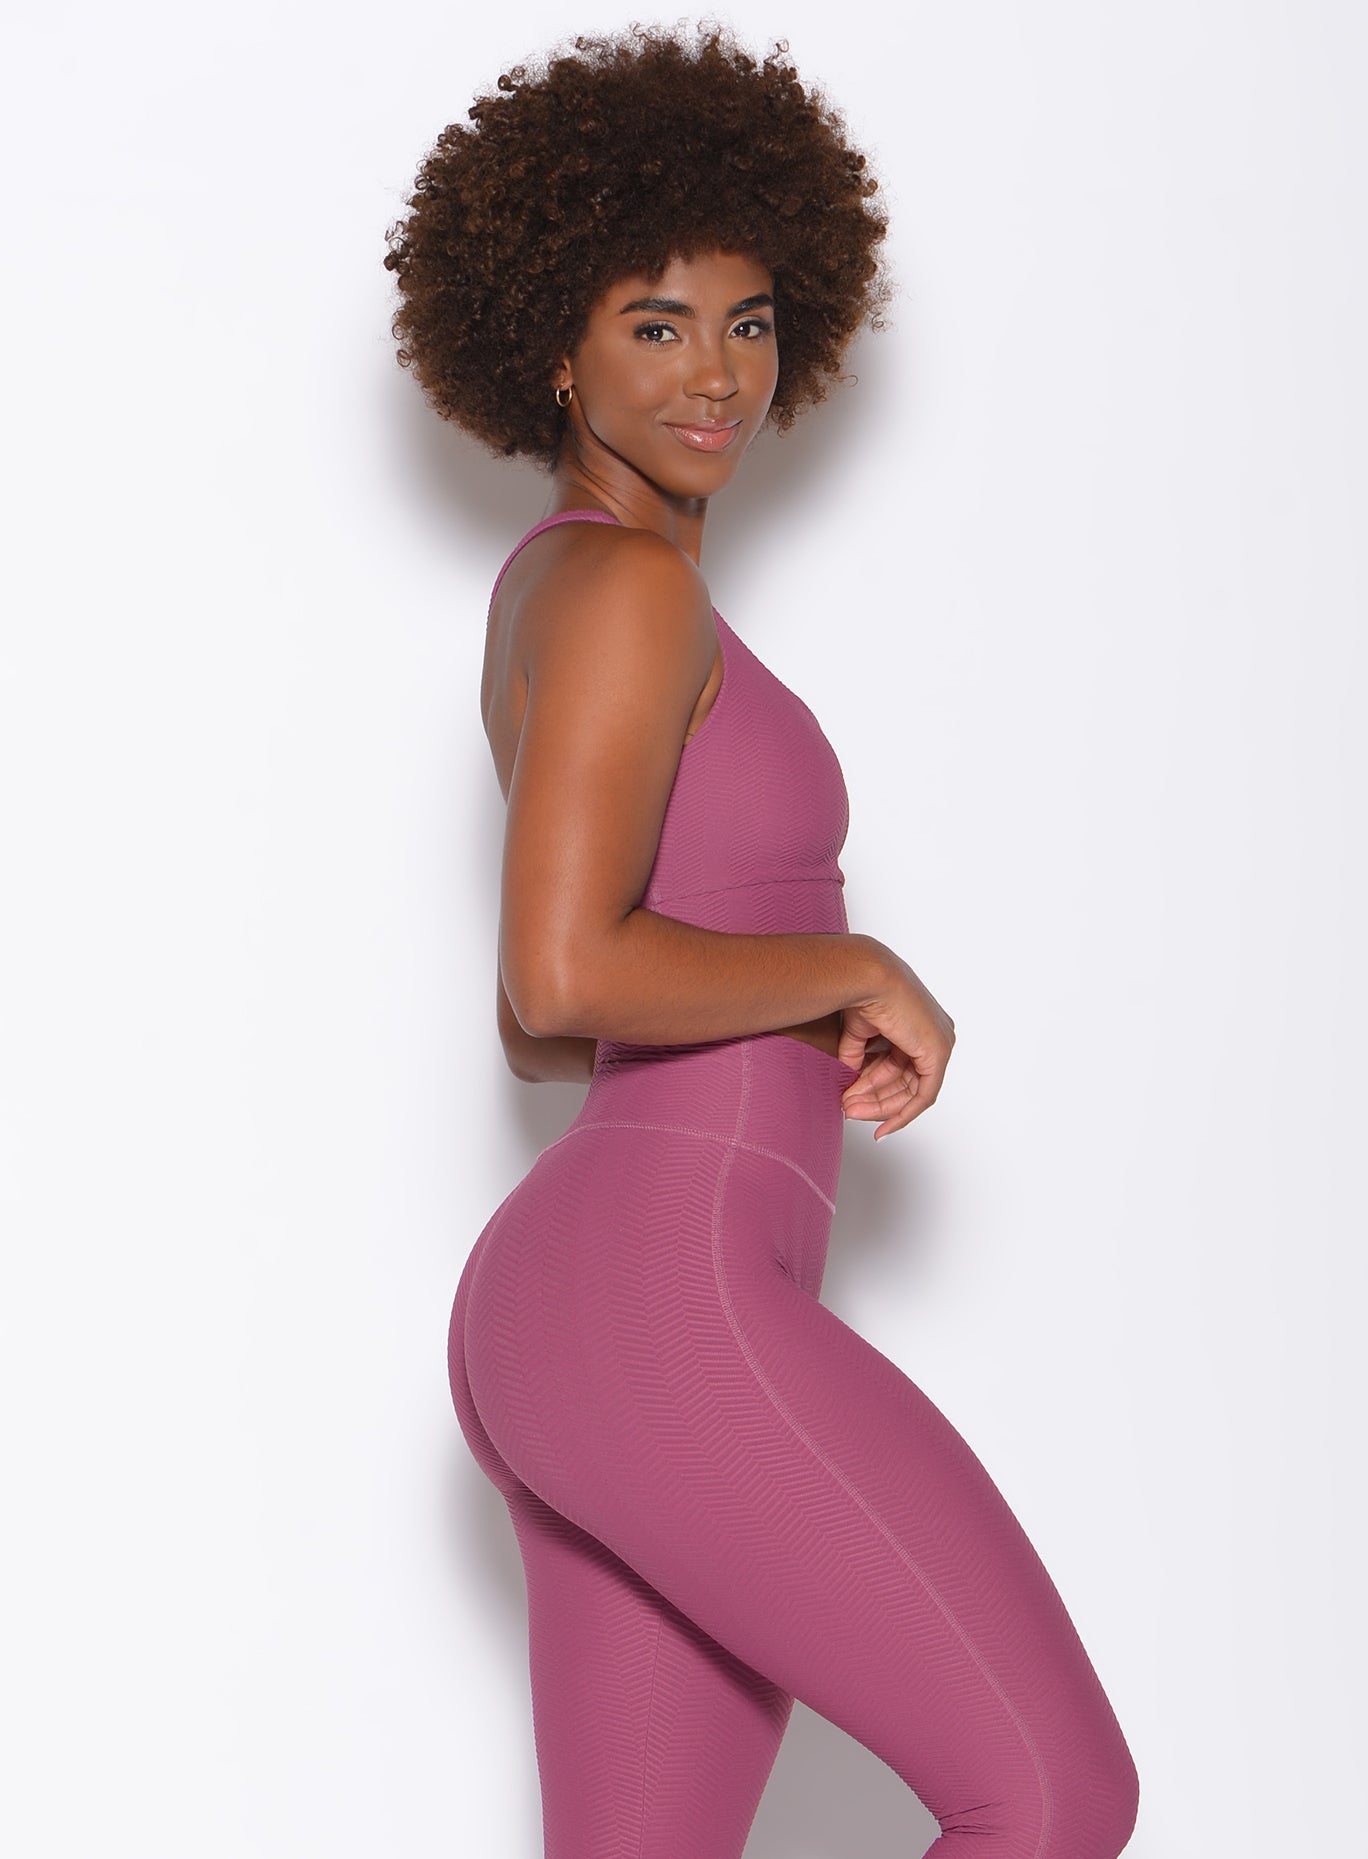 Right side profile view of a model facing to her right wearing our chevron sports bra in rose wine color and a matching leggings